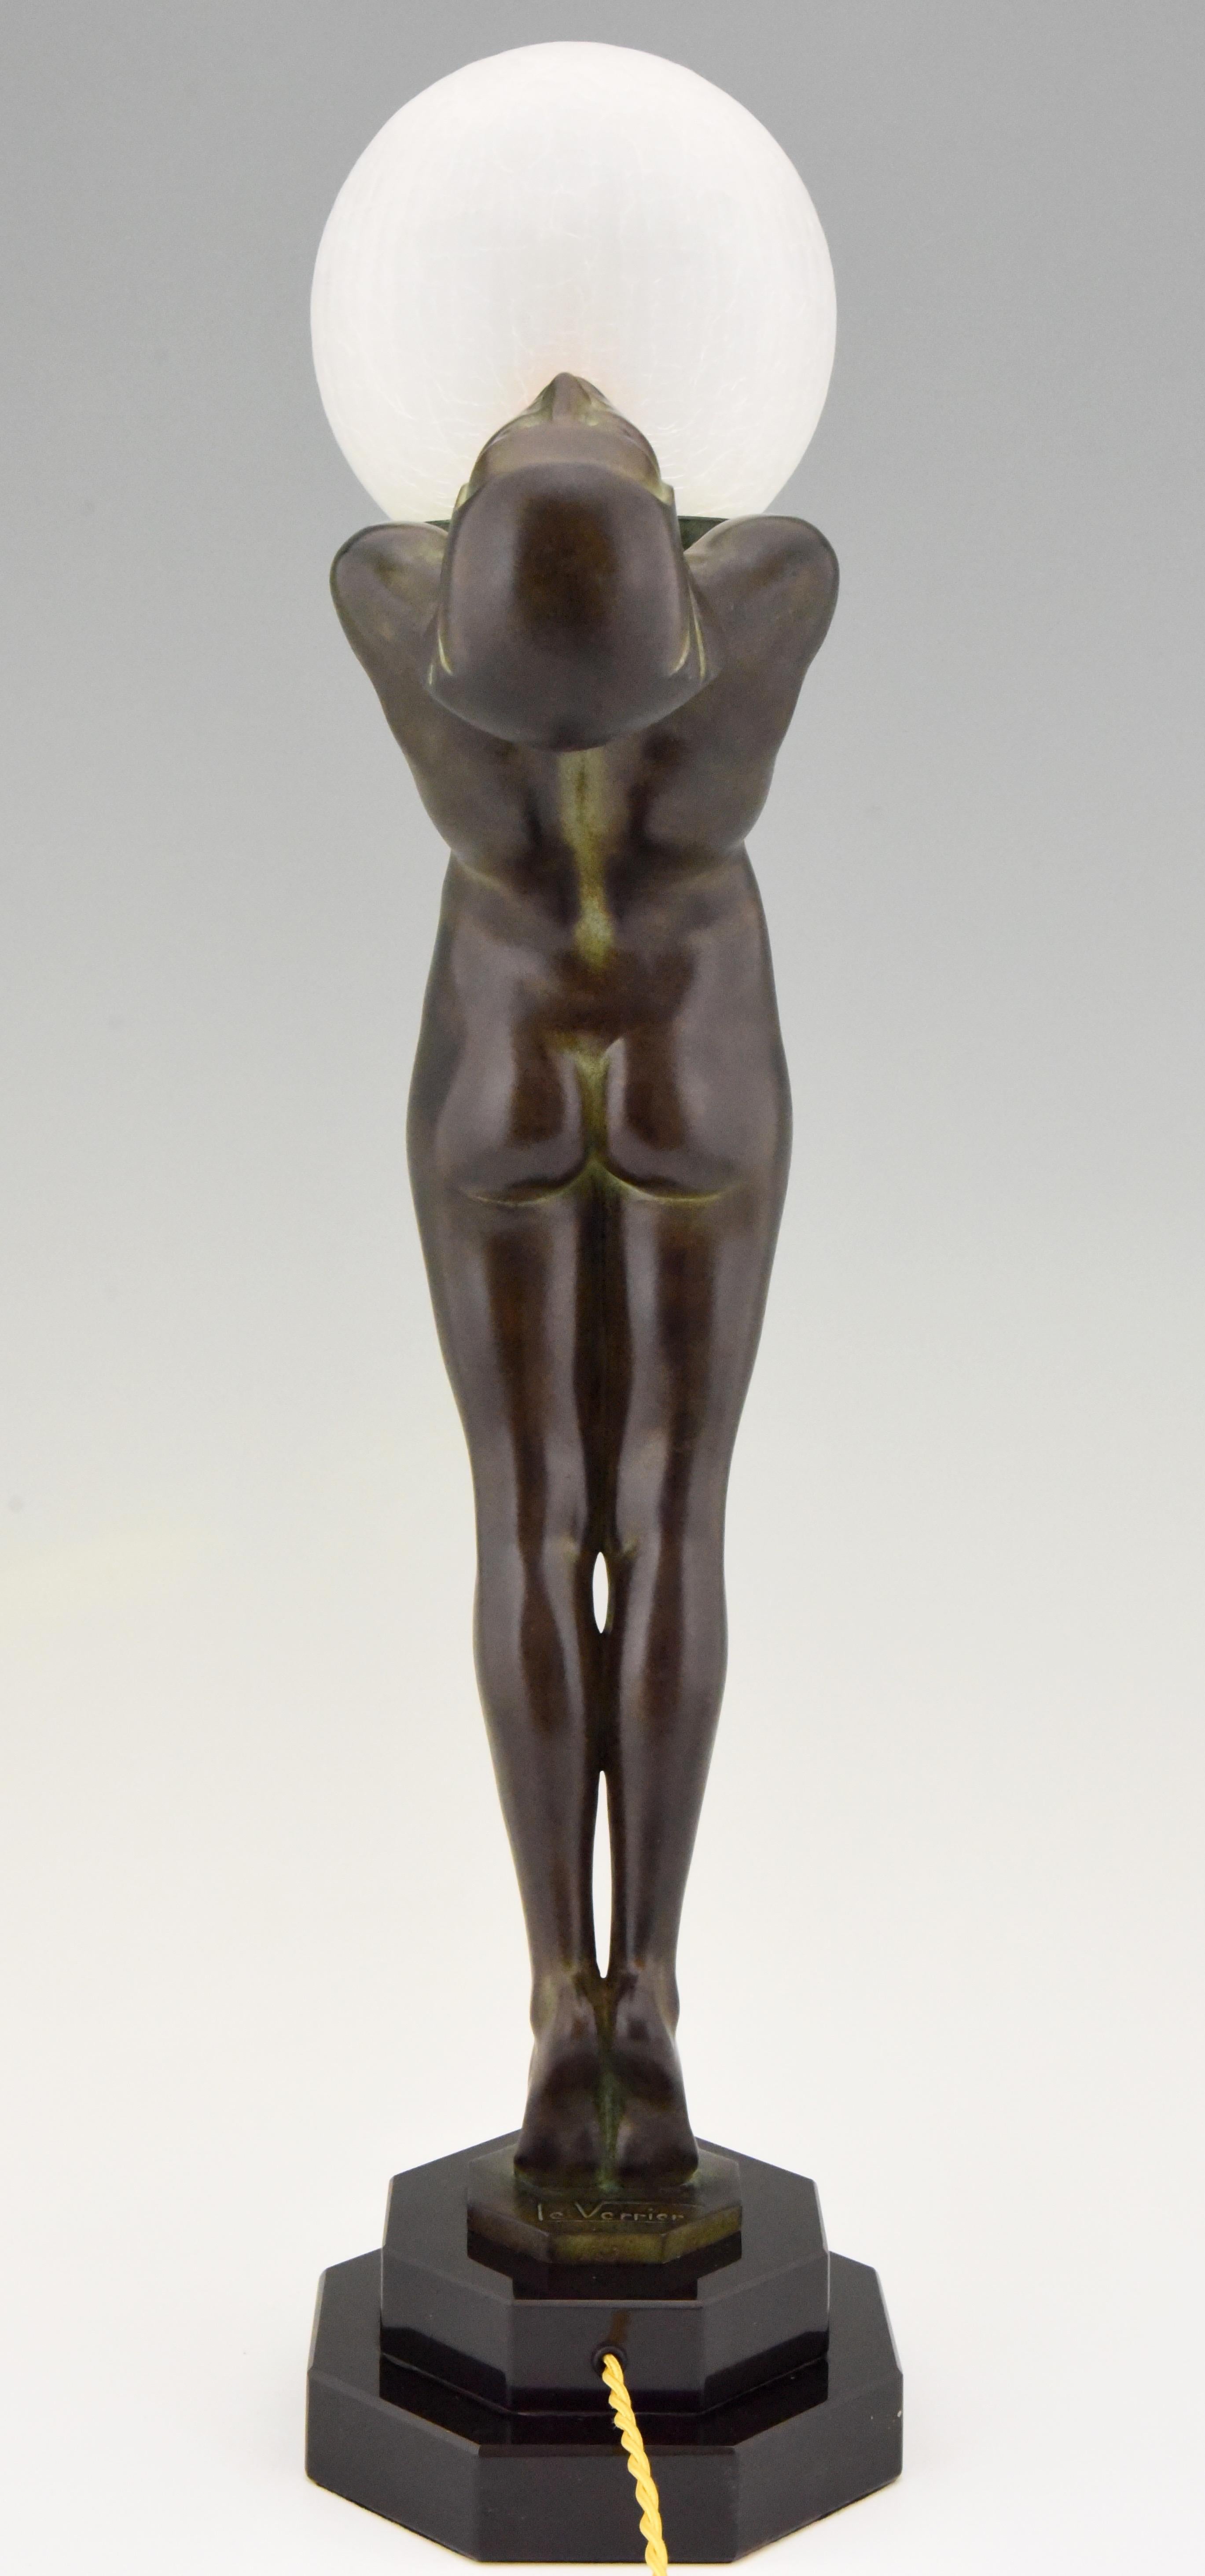 Pair of Art Deco Style Lamps Lumina Standing Nude Sculpture Max Le Verrier For Sale 2